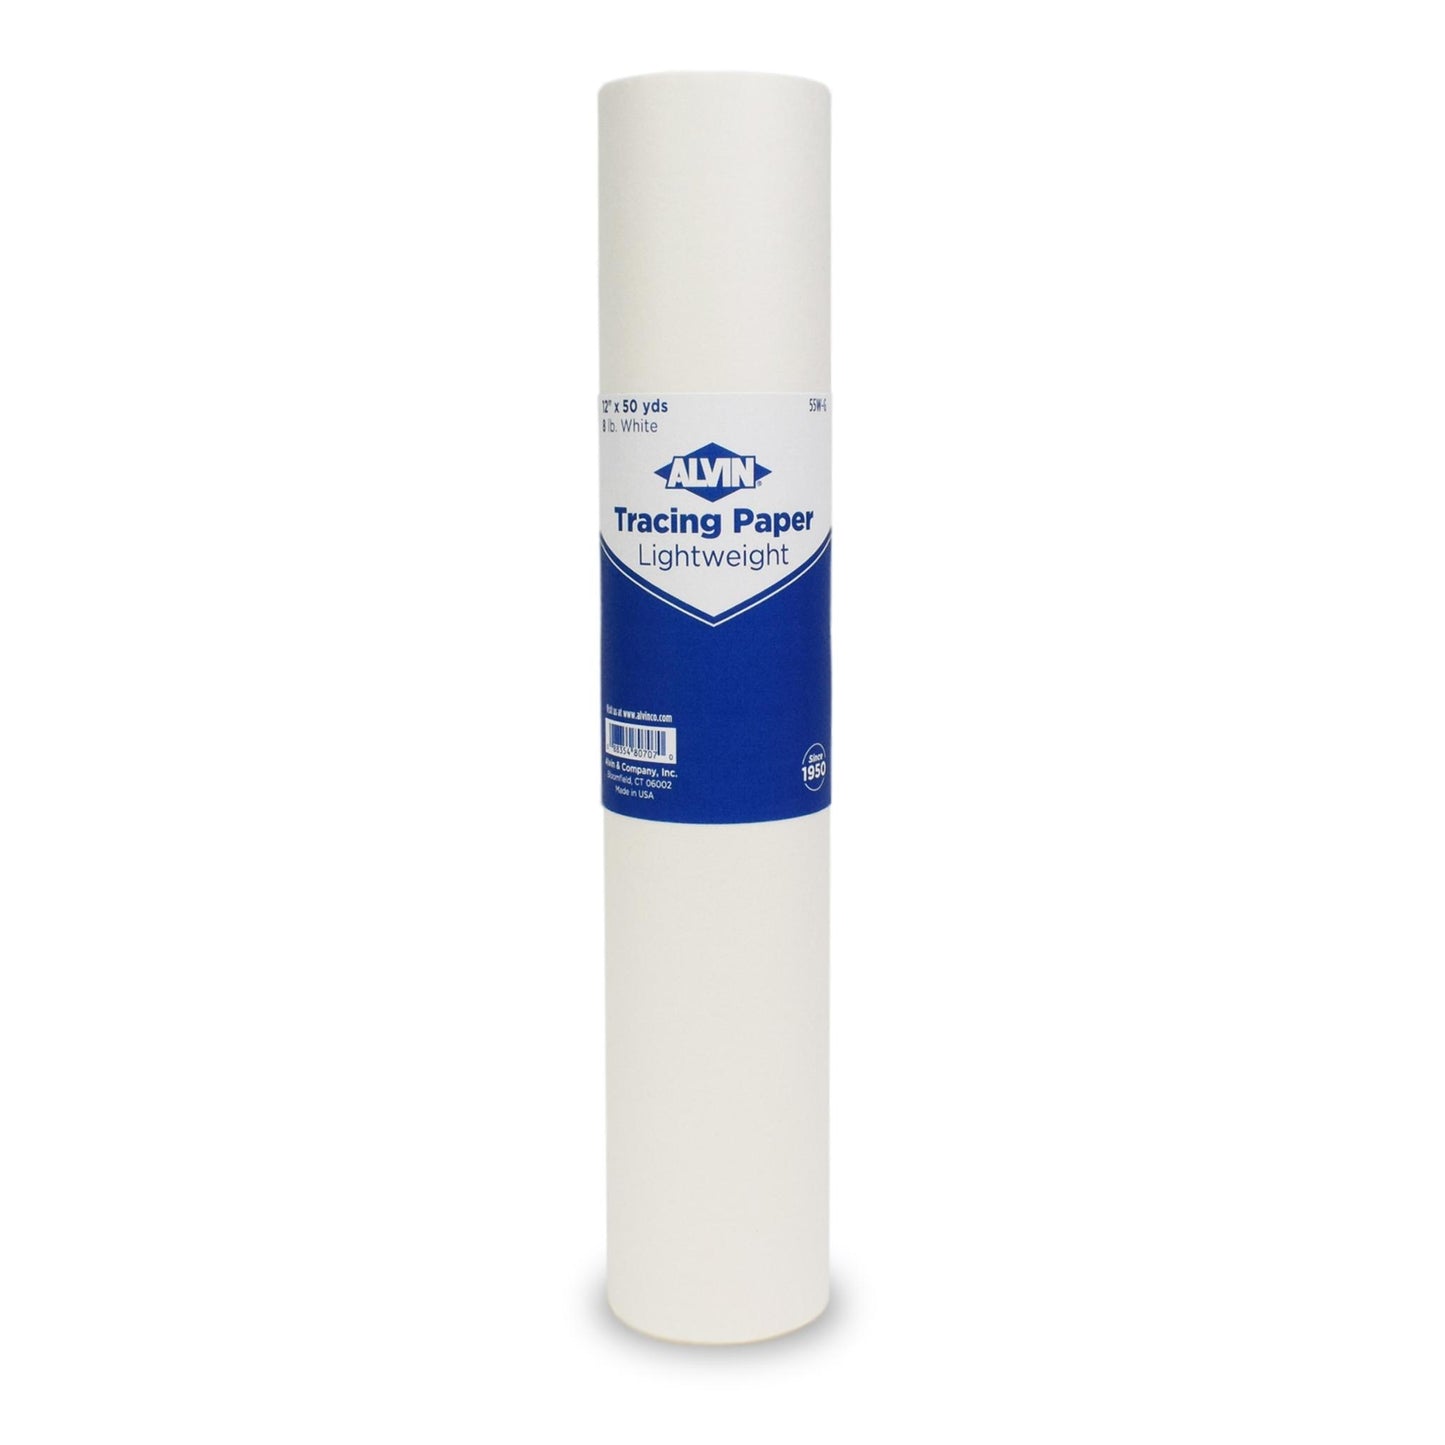 Pacific Arc Lightweight White Tracing Paper Roll 12 x 50yd - 55w-g